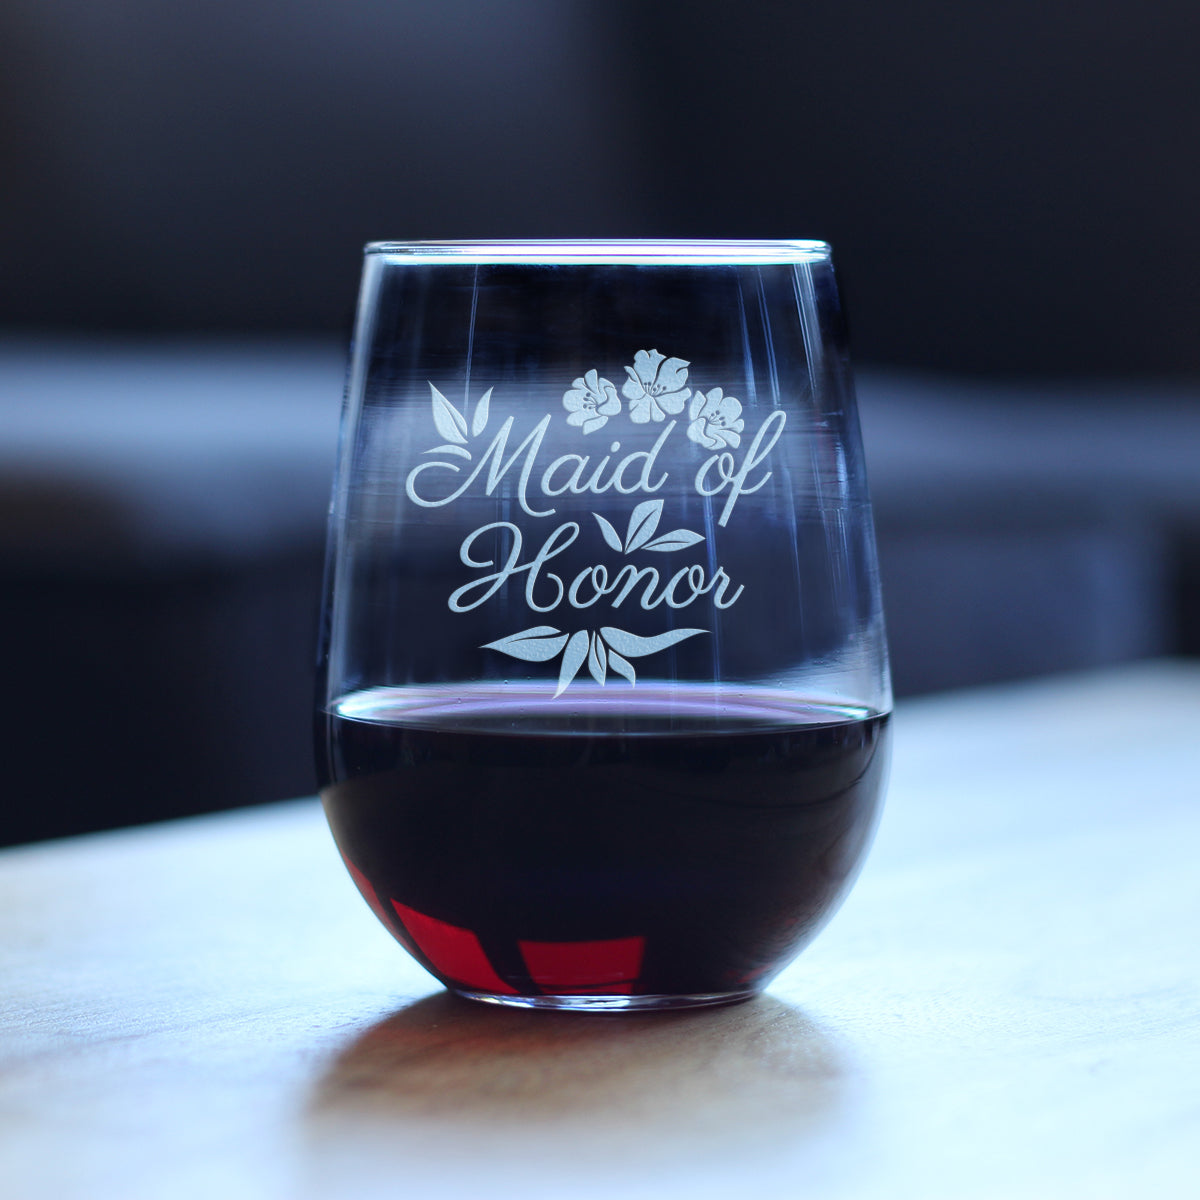 Maid of Honor Stemless Wine Glass - Maid of Honor Proposal Gifts - Unique Engraved Wedding Cup Gift